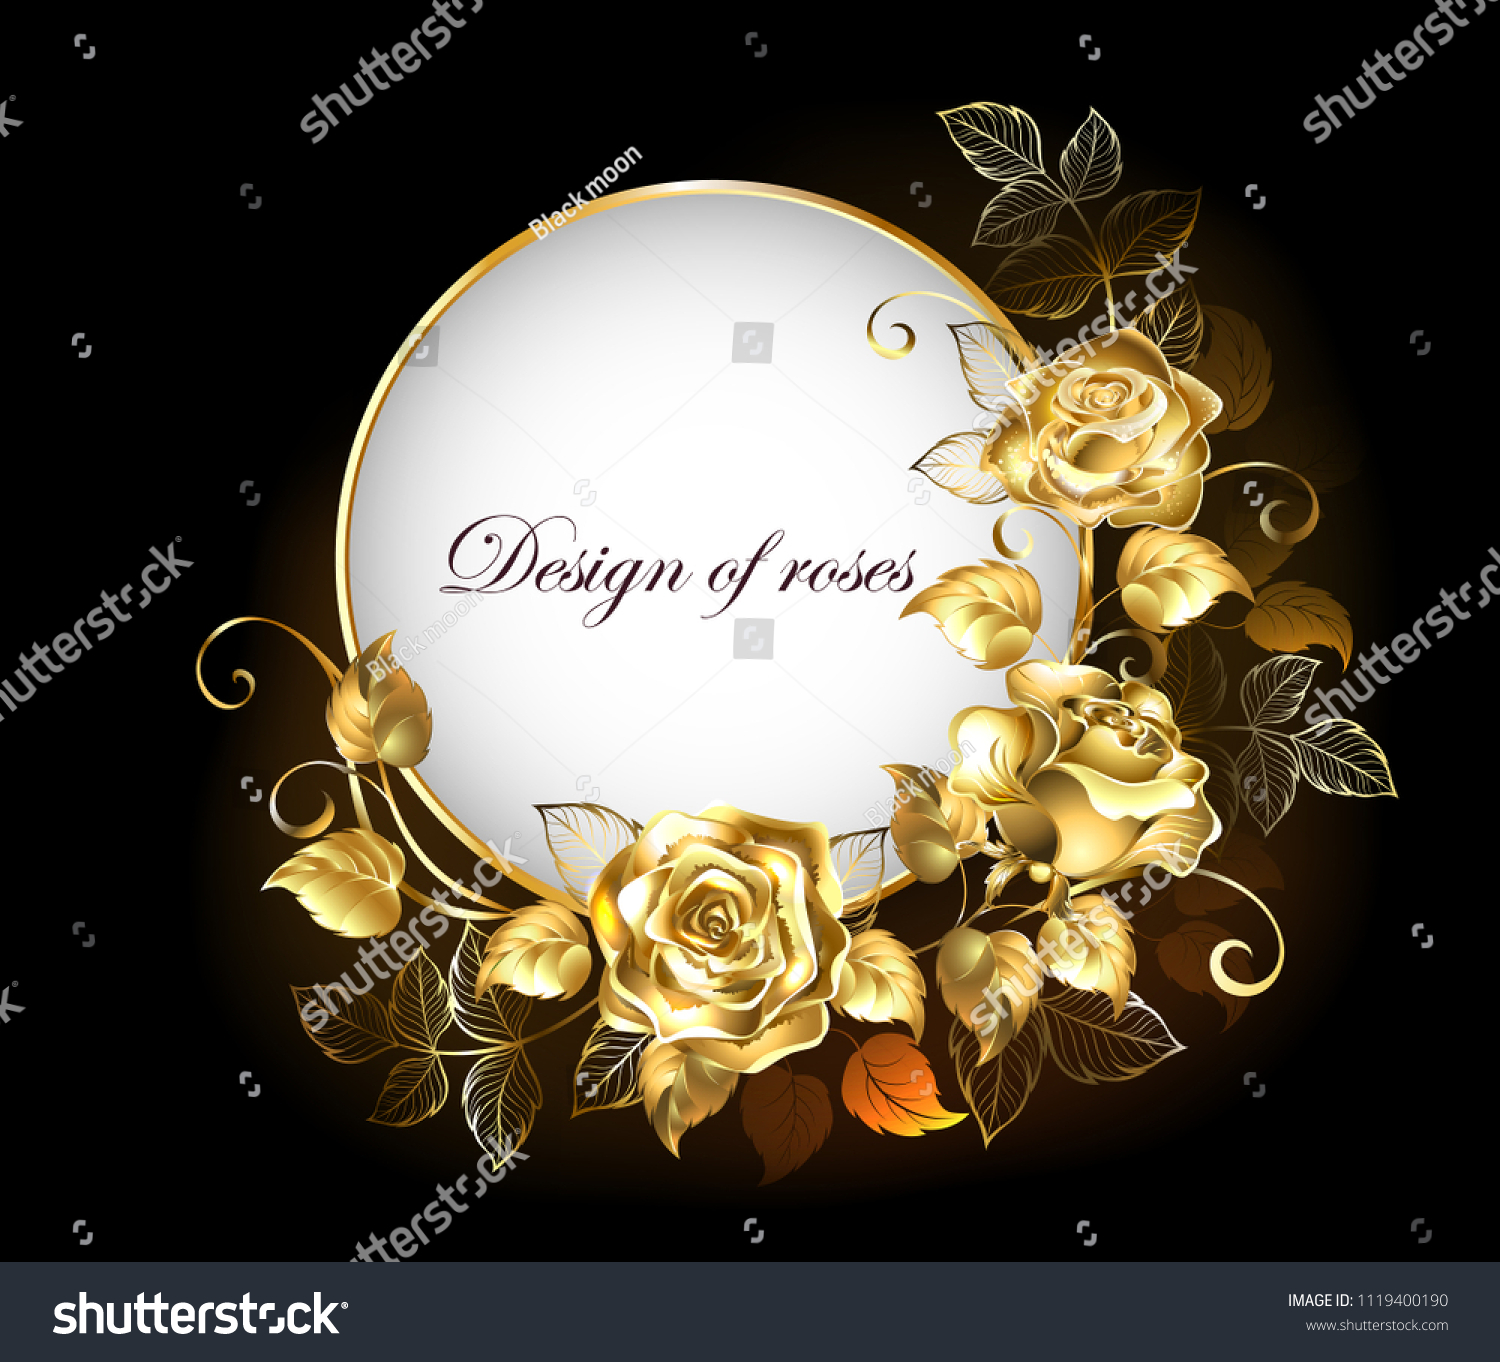 SVG of Round, white banner with gold, jewelry roses on black background.
 svg